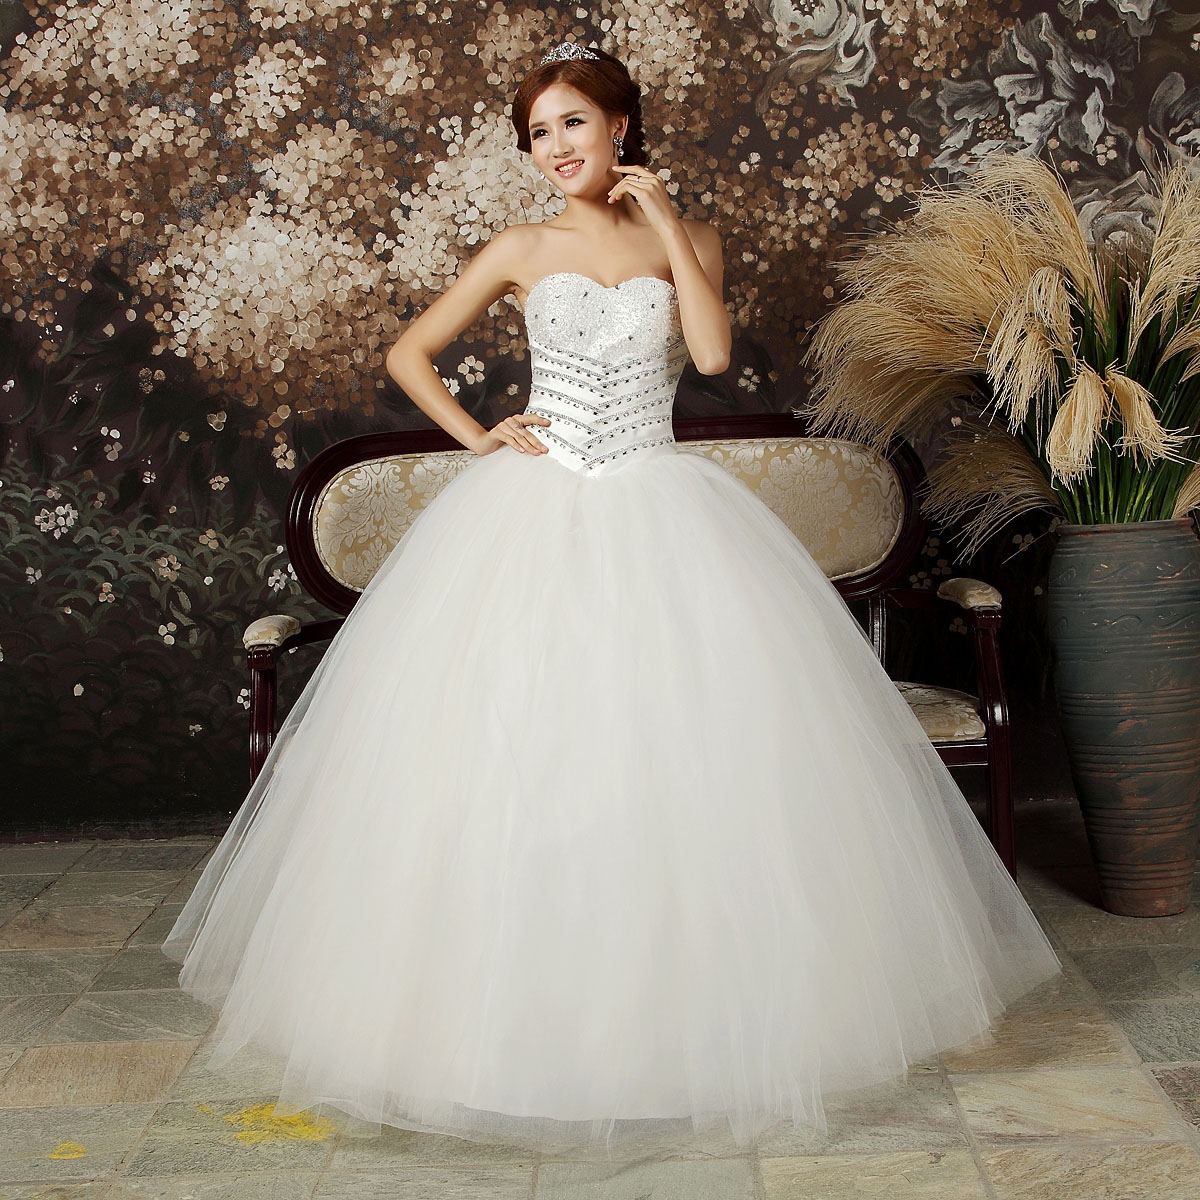 Chic Princess Wedding Gowns.